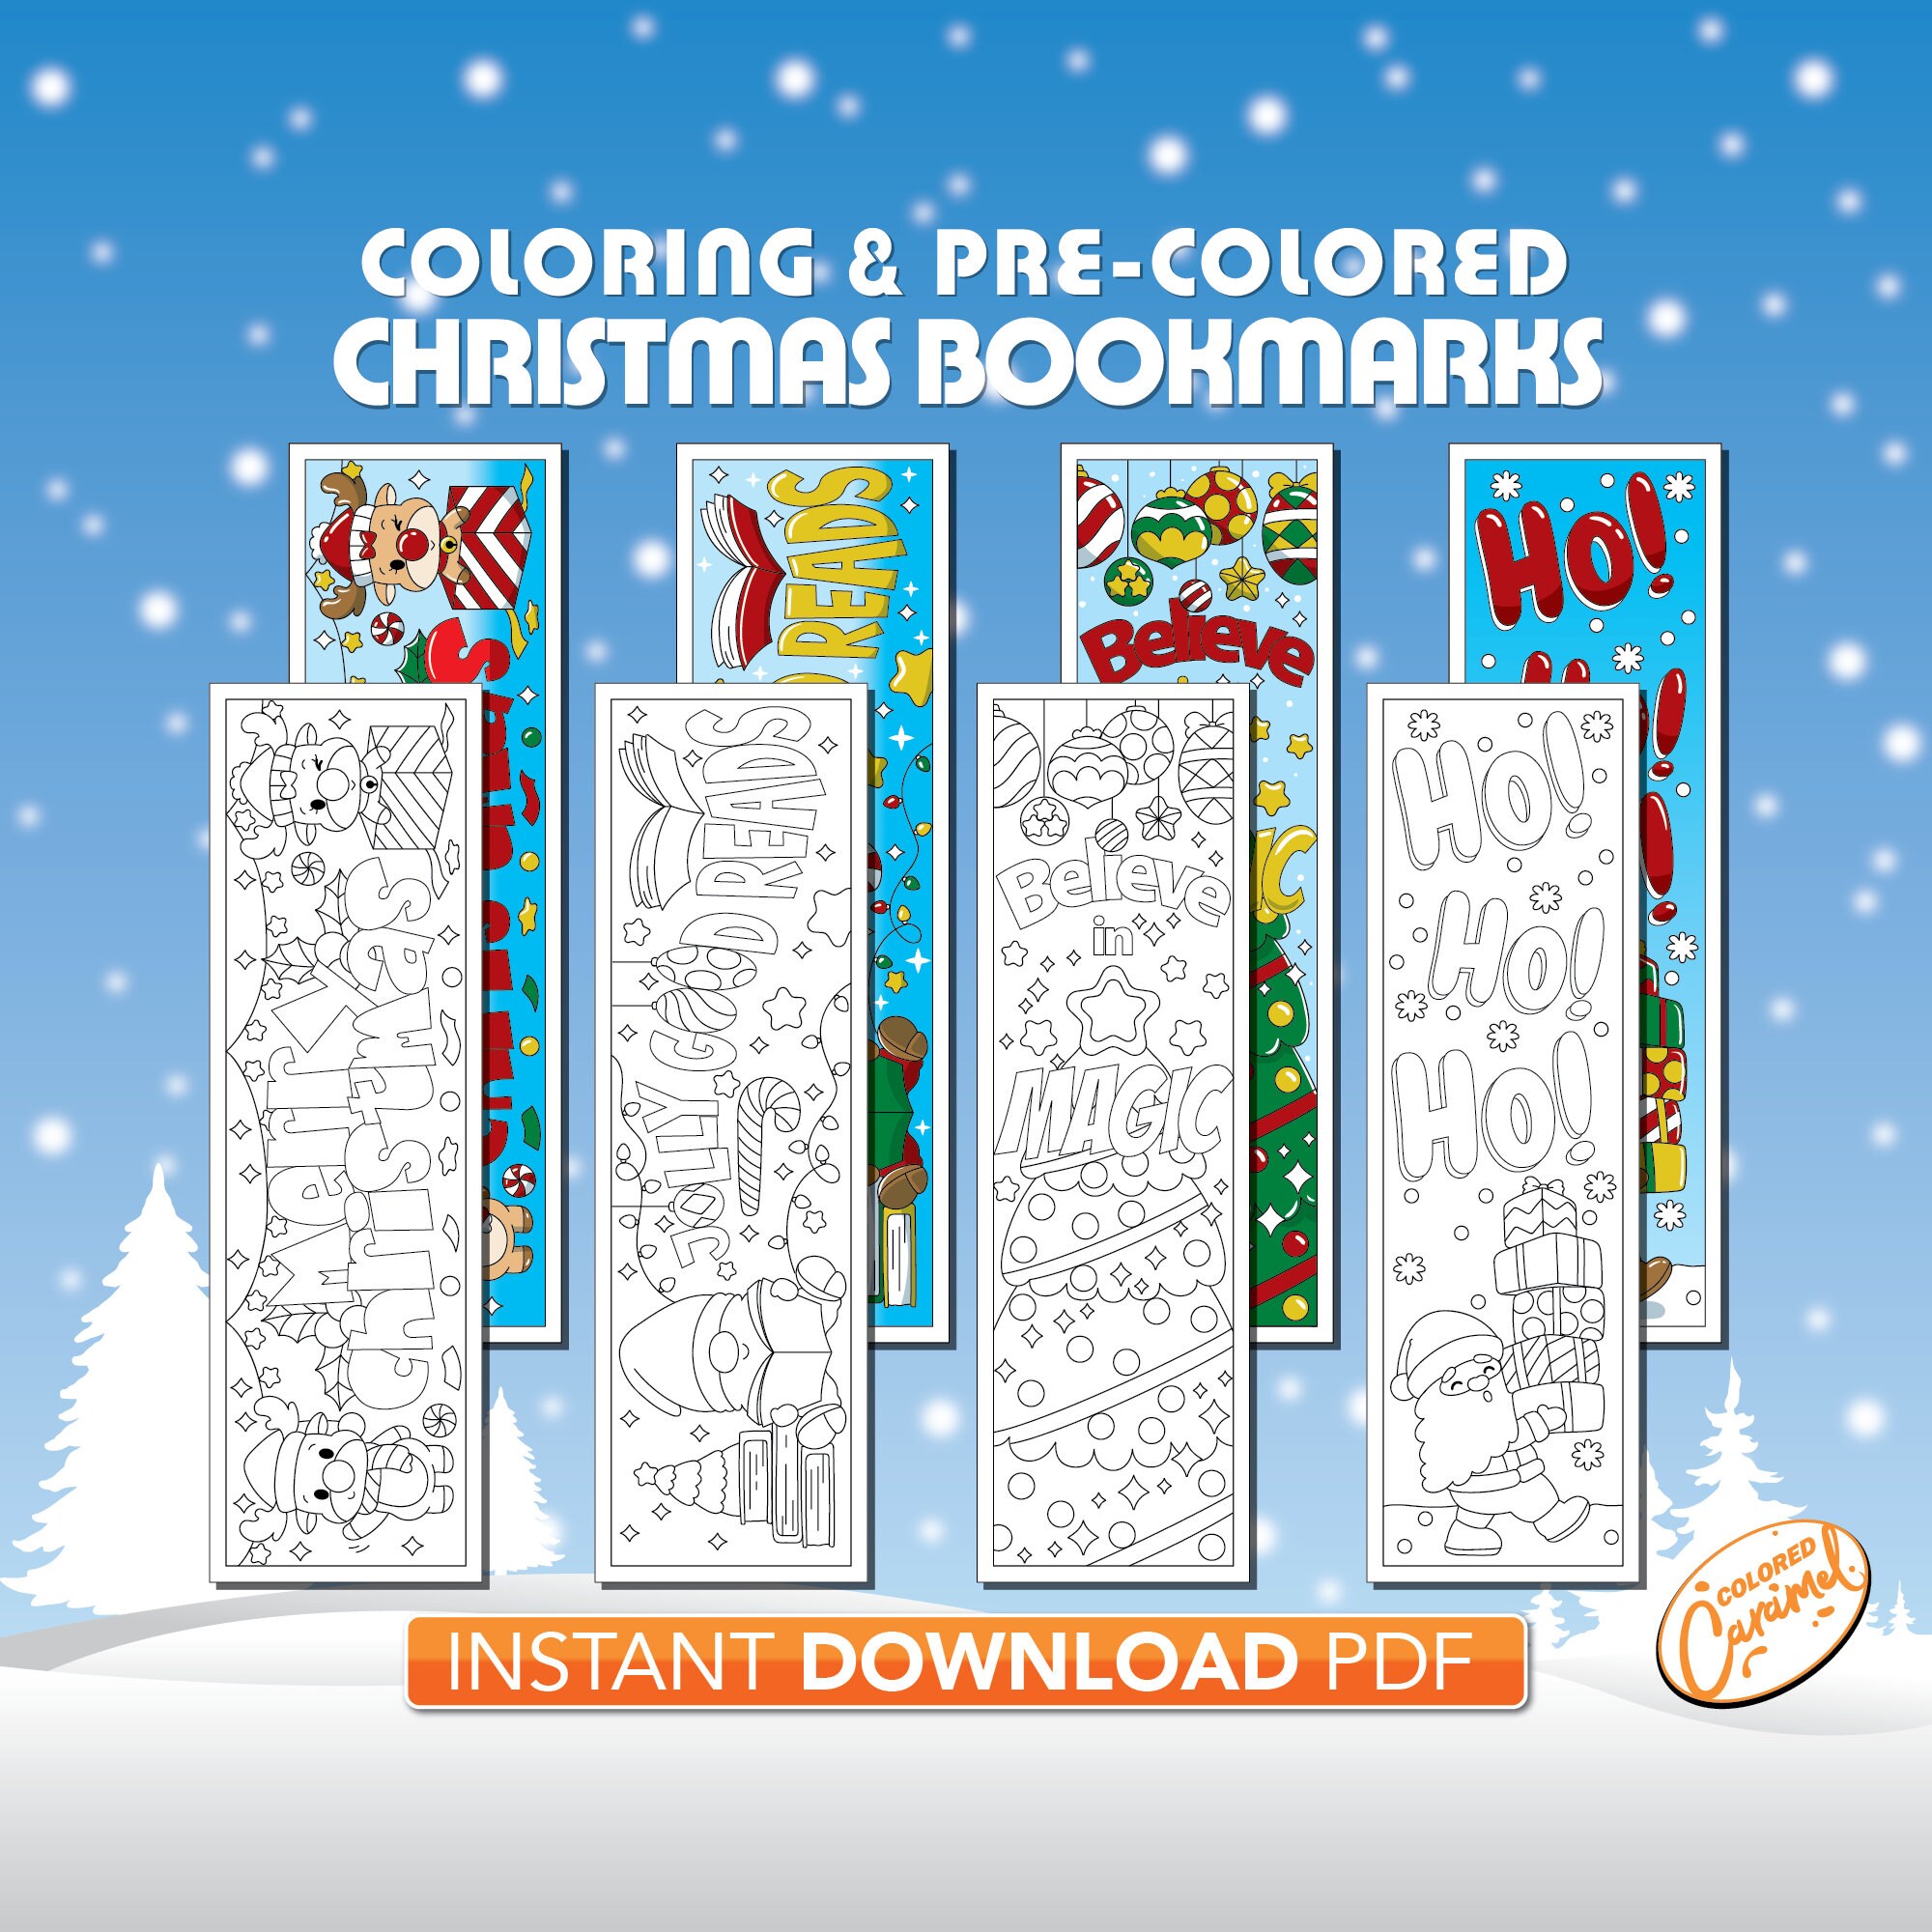 Coloring Christmas Bookmarks, December Holiday Festive Instant Digital Download PDF, Cute Set of Colorable DIY Make Your Marker for Book